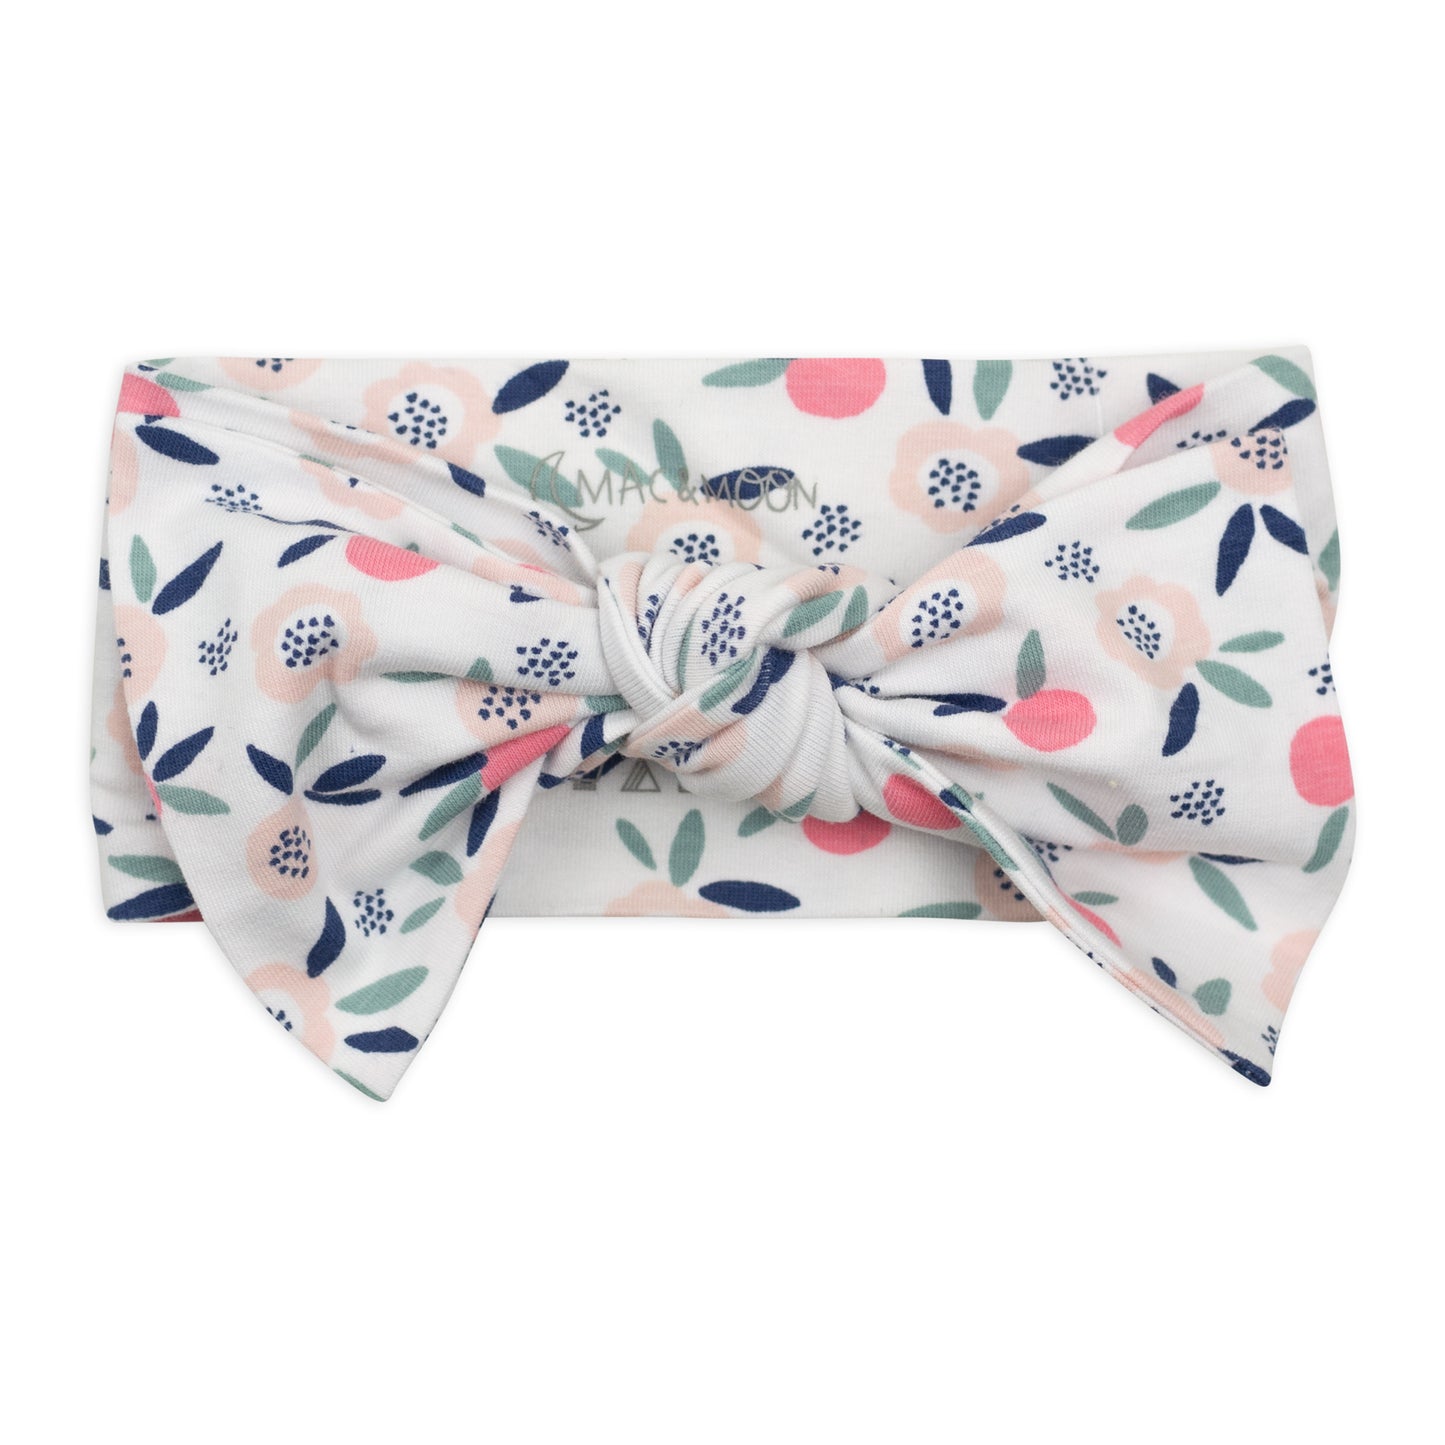 2-Pack Organic Cotton Headband in Bunny Floral Print